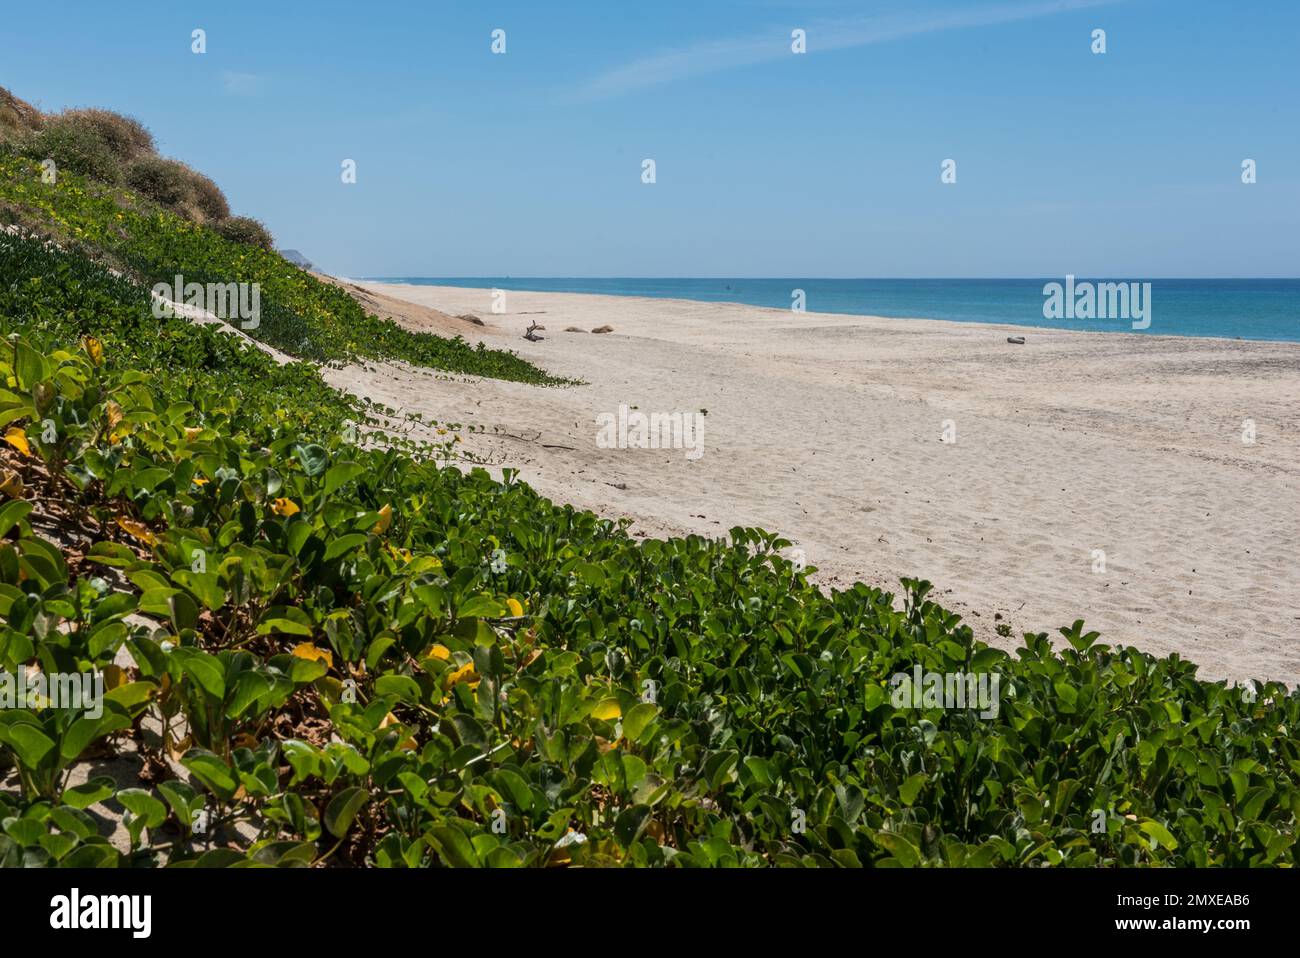 A closeup shot of beach morning glory leaves covering the sand slope in the baech Stock Photo